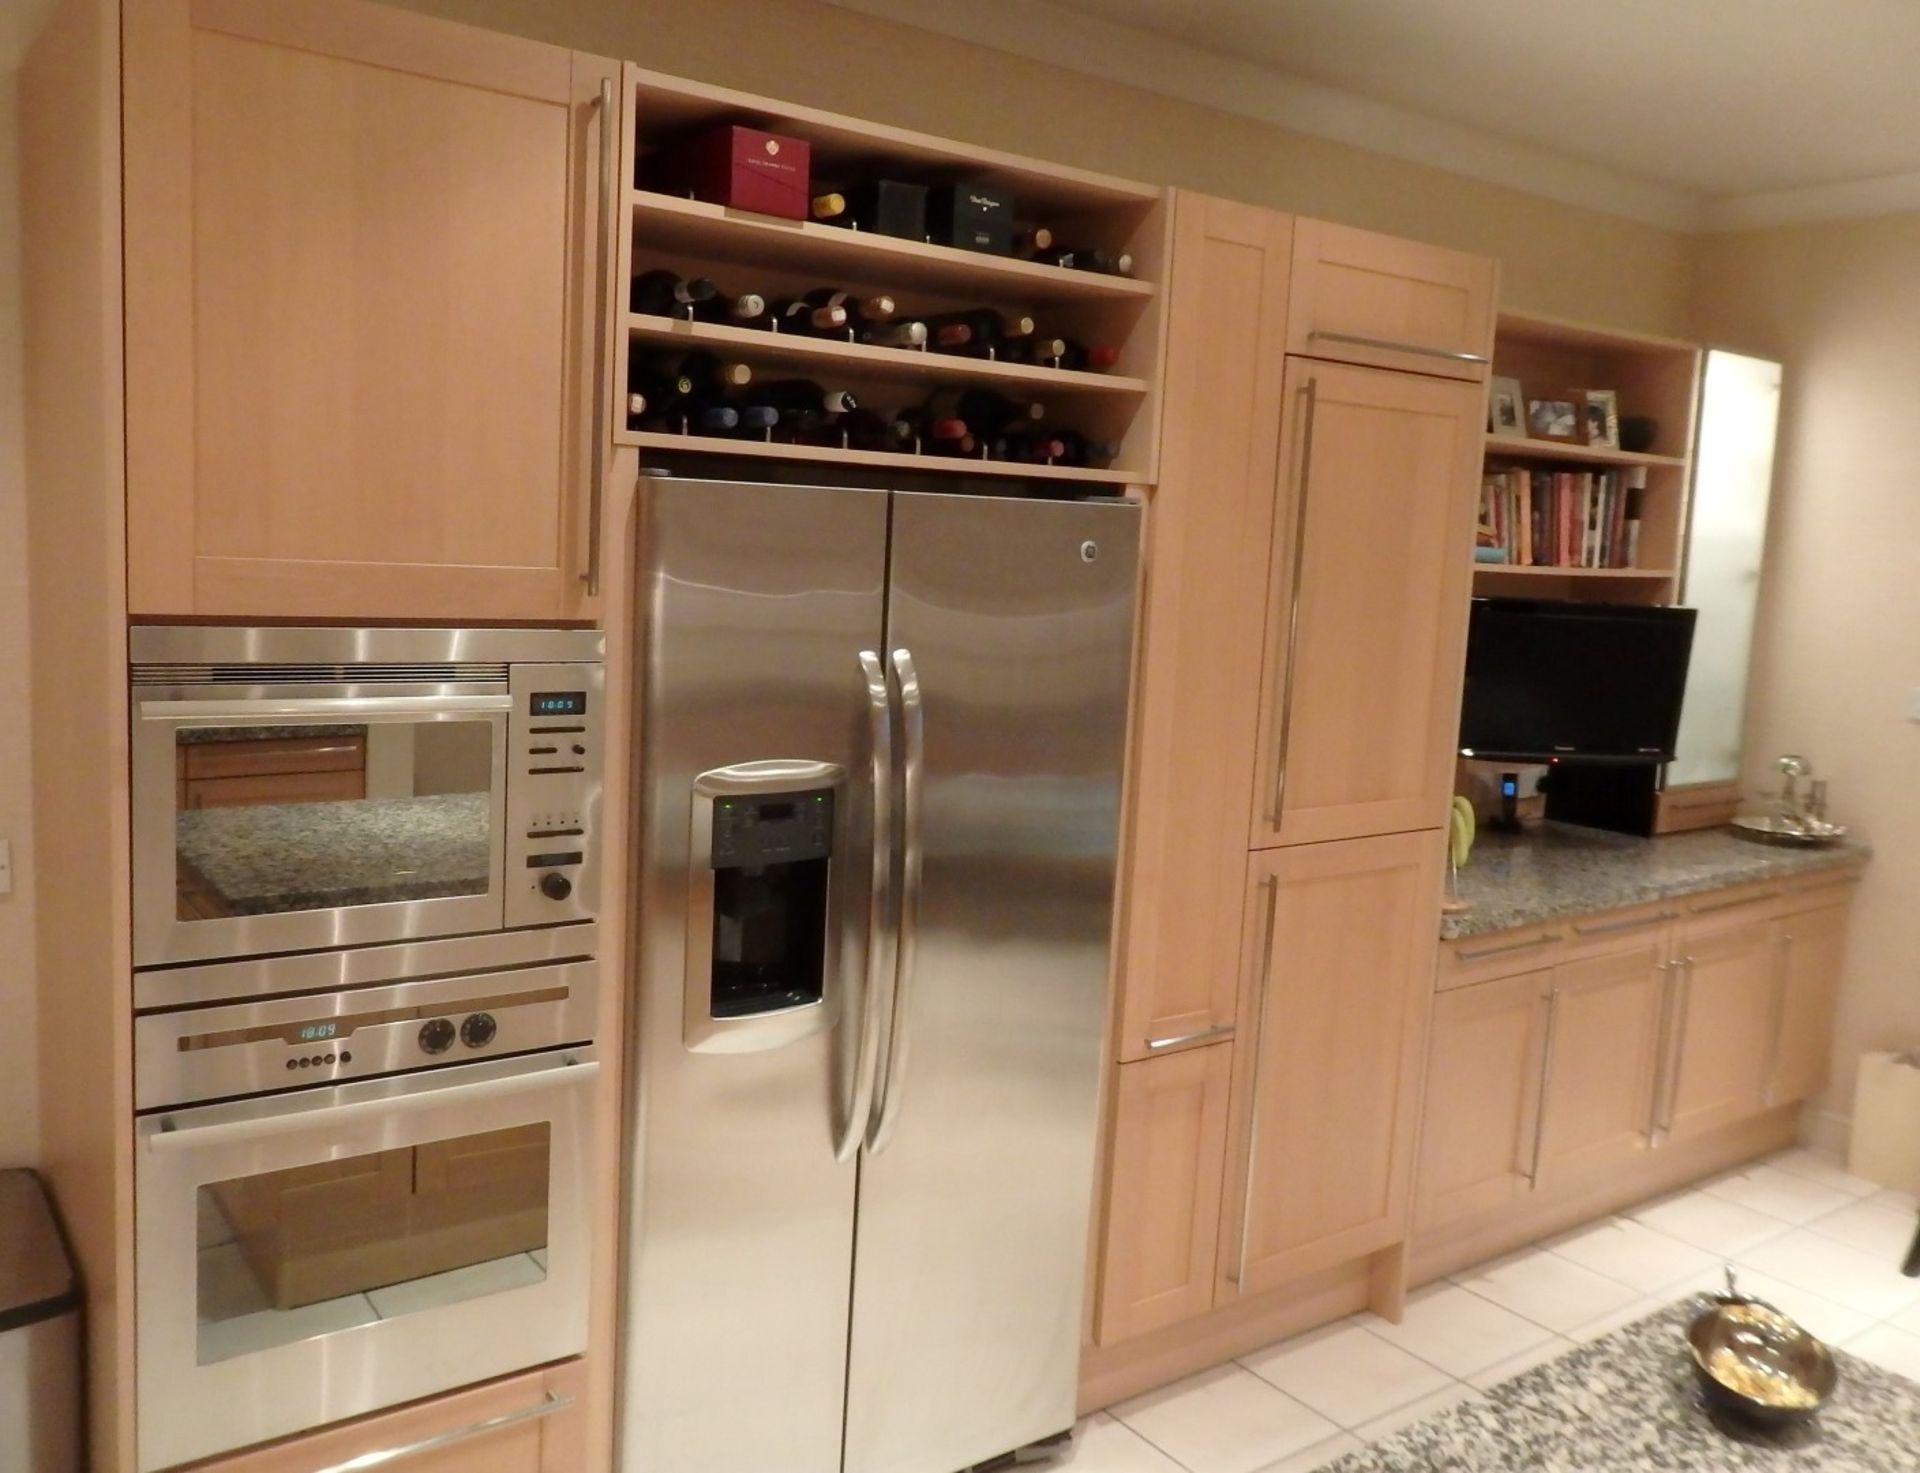 1 x Siematic Fitted Kitchen With Beech Shaker Style Doors, Granite Worktops, Central Island and - Image 78 of 151